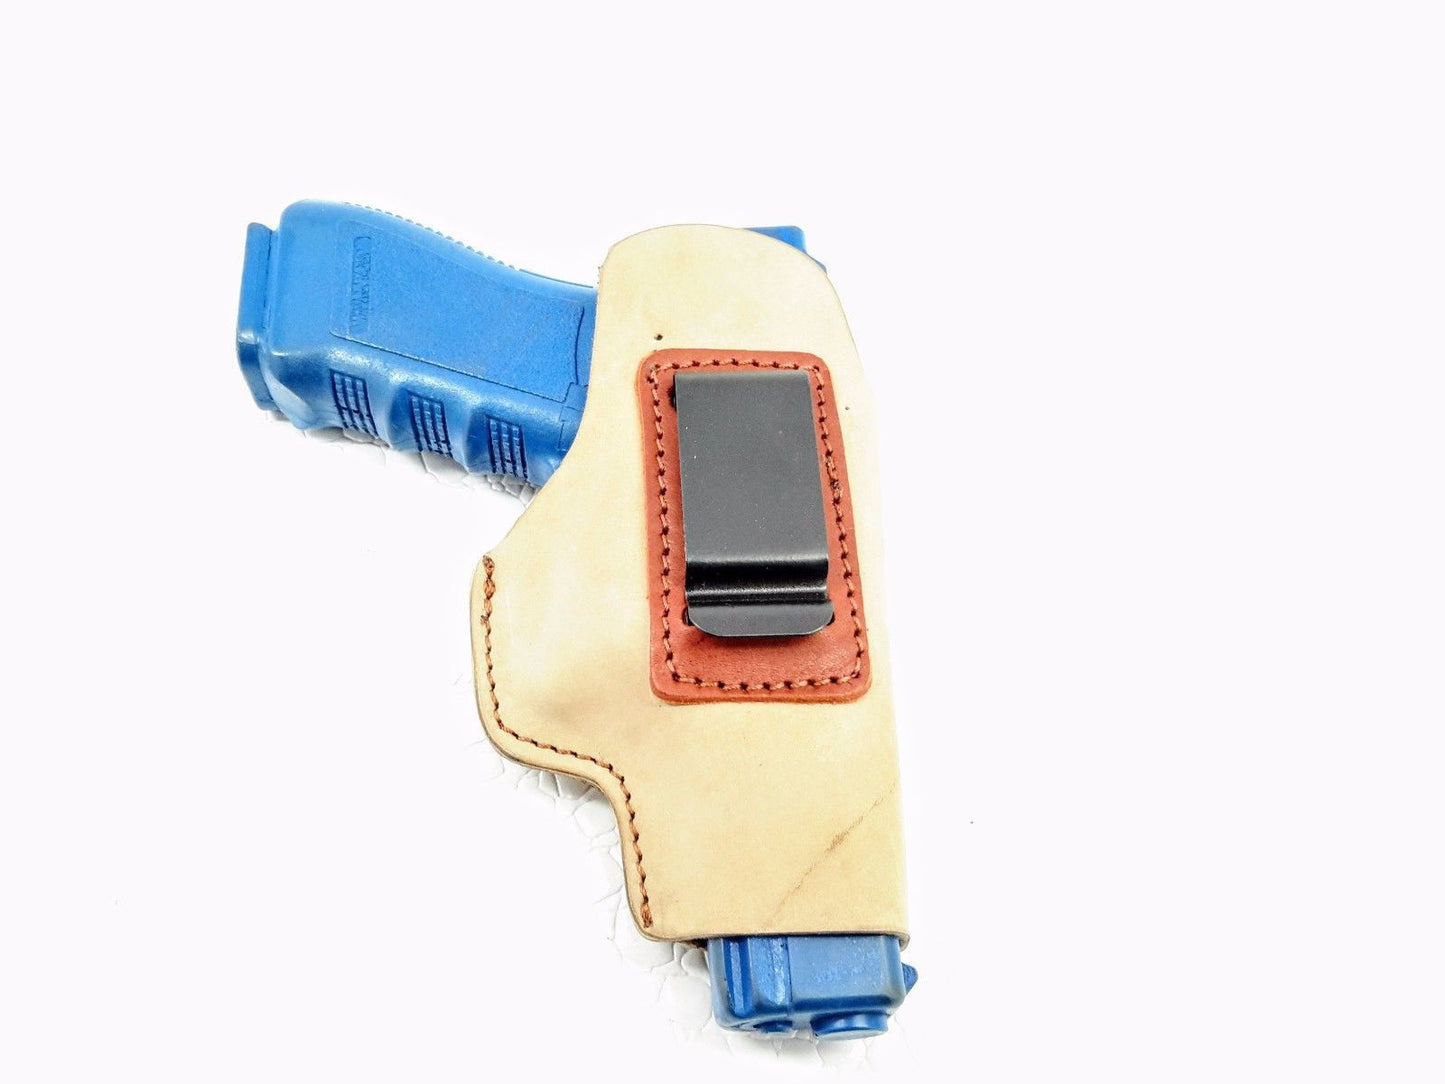 IWB Open Top Inside the Waistband Holster, Choose your Gun and Color